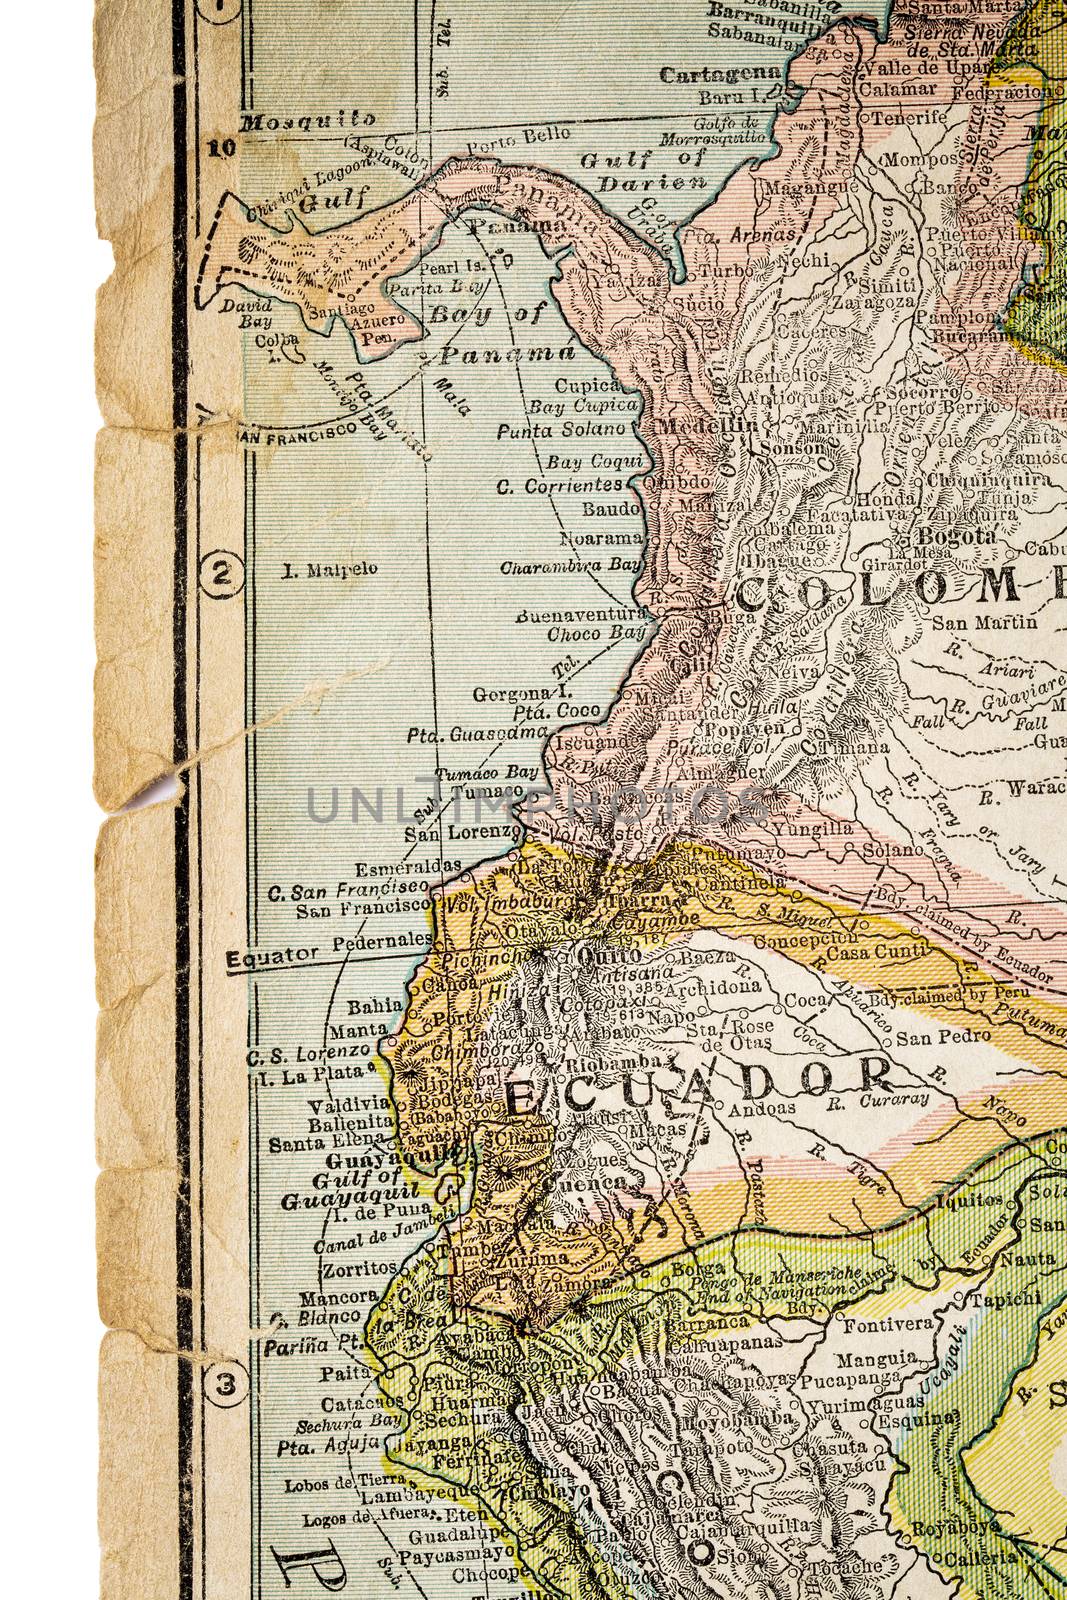 Colombia and Ecuador on vintage map by PixelsAway